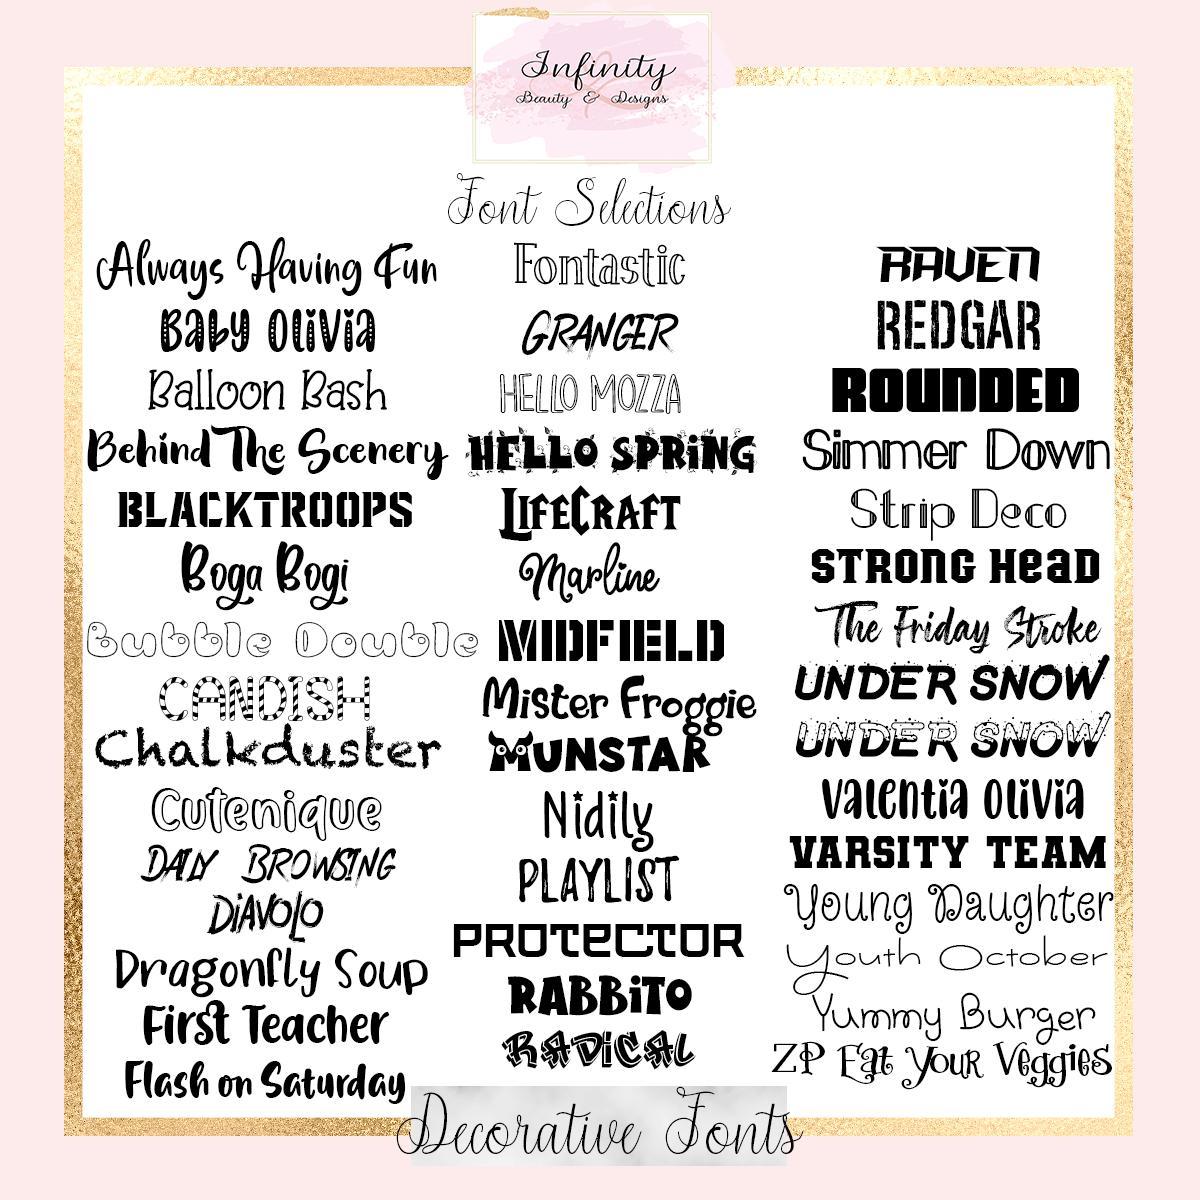 First Day Boards-Infinity Beauty & Designs